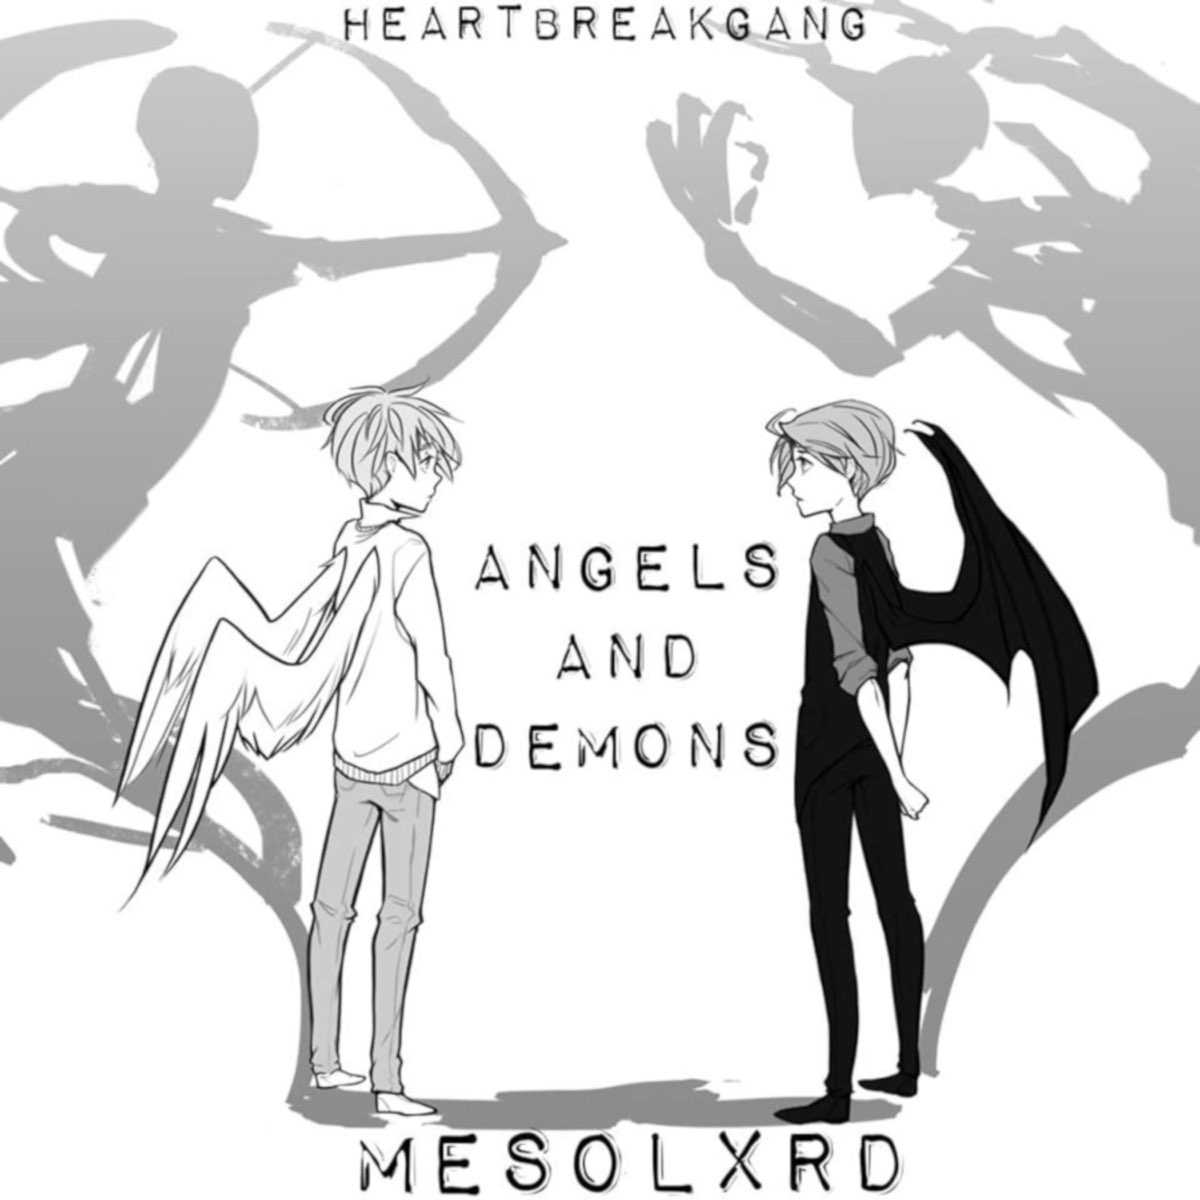 Angels and Demons (Instrumental) by MesoLxrd on Apple Music